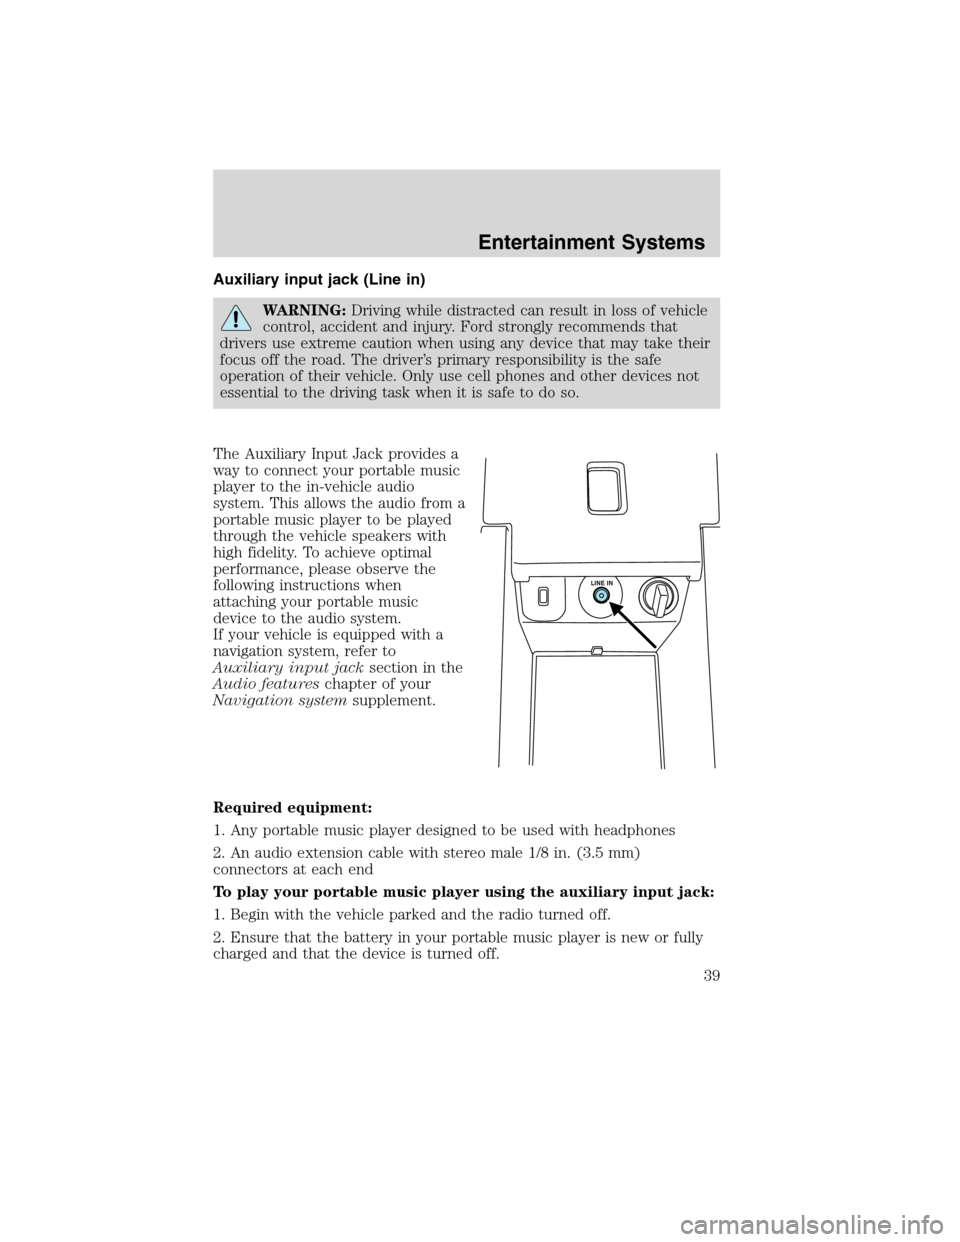 LINCOLN MKS 2010 User Guide Auxiliary input jack (Line in)
WARNING:Driving while distracted can result in loss of vehicle
control, accident and injury. Ford strongly recommends that
drivers use extreme caution when using any dev